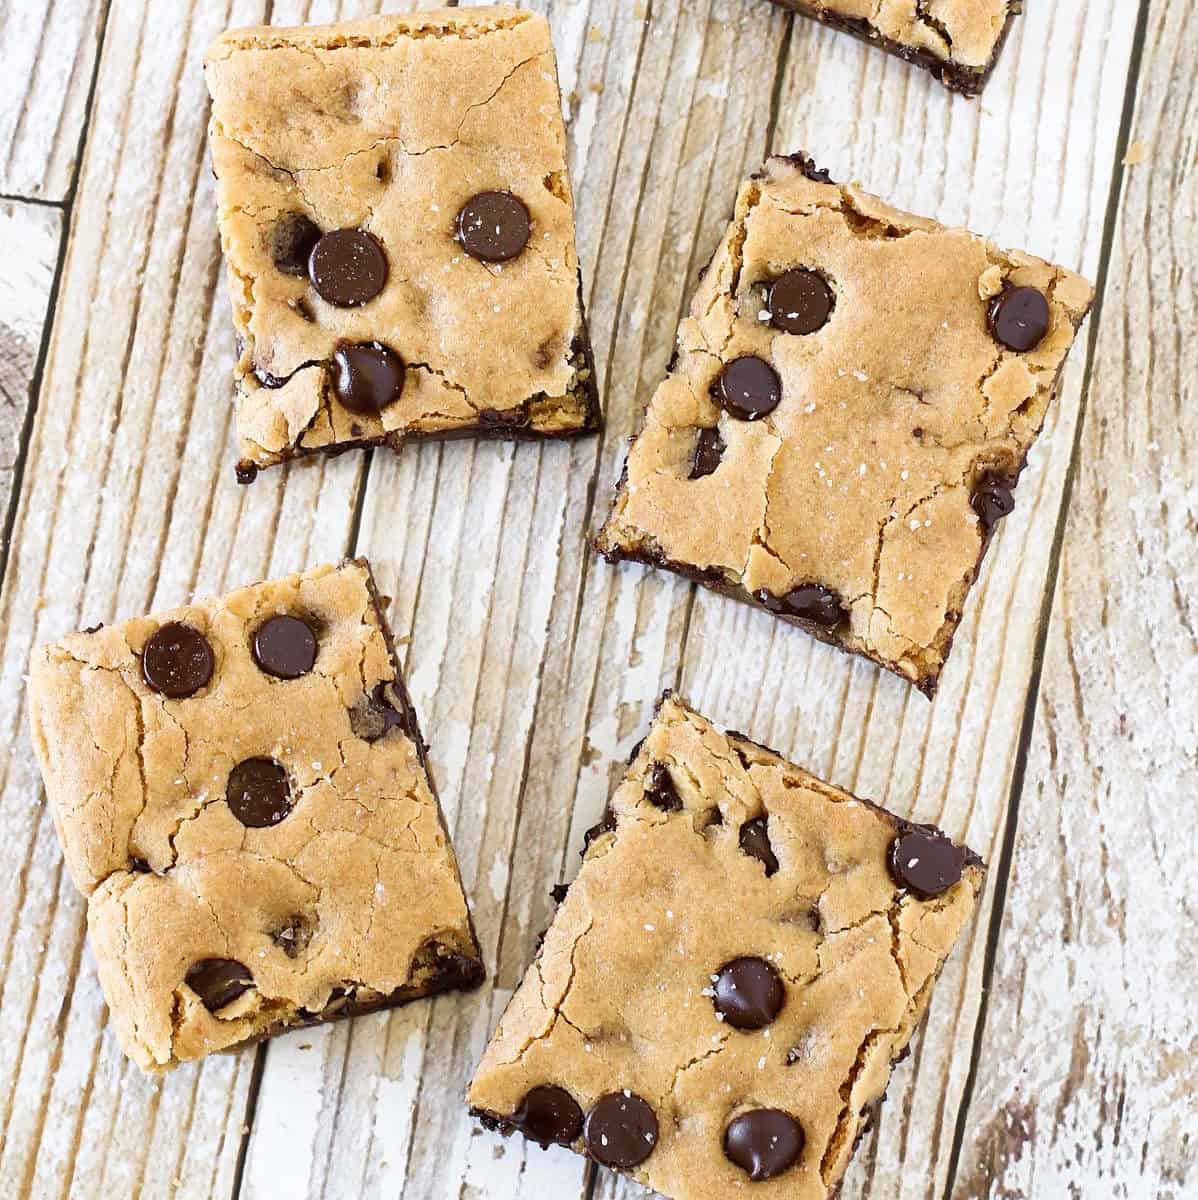  Satisfy your sweet tooth with these gooey chocolate chip cookies.